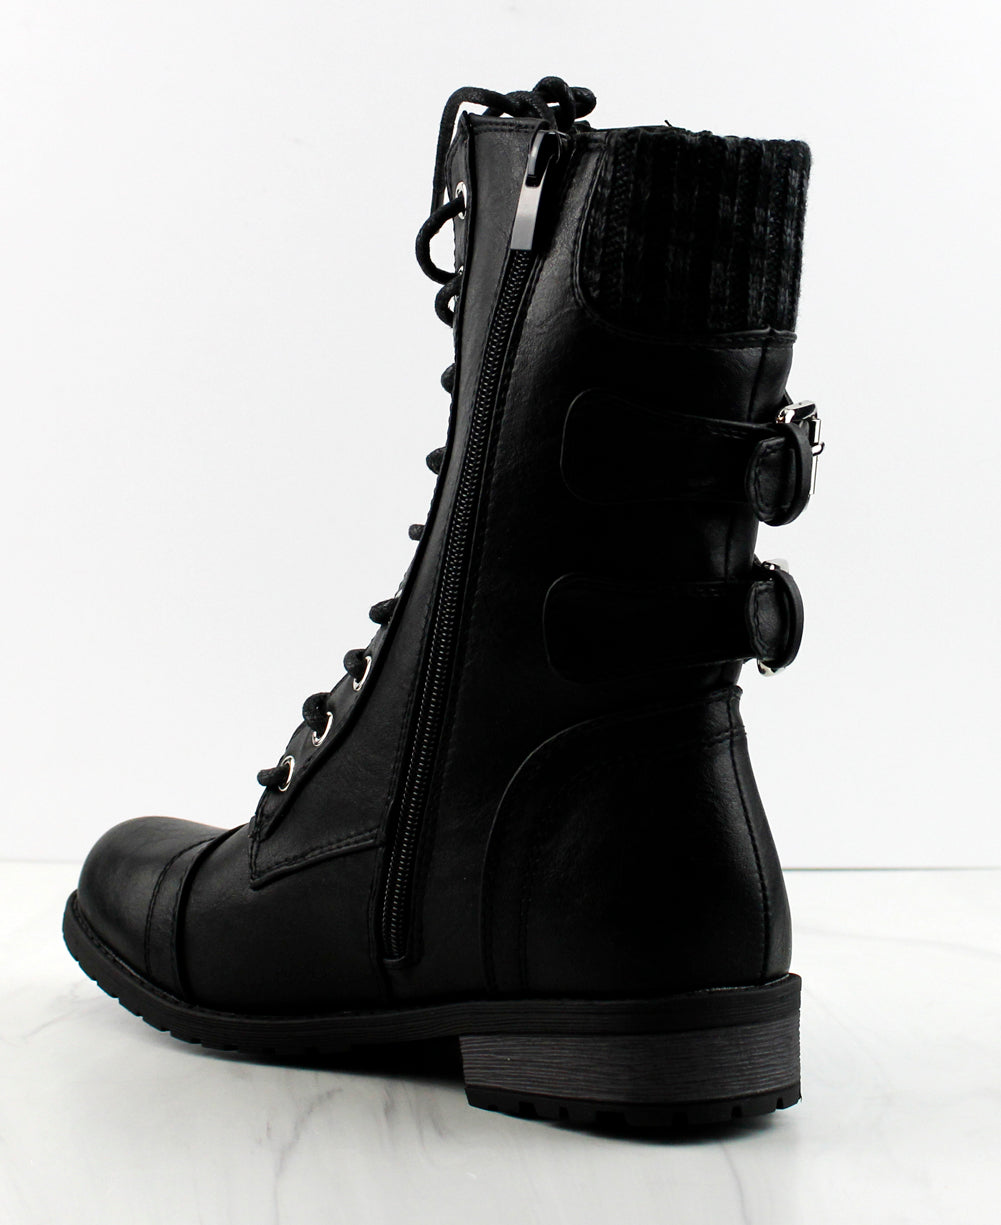 Lace Up Buckle Detail Boots Black, Boots